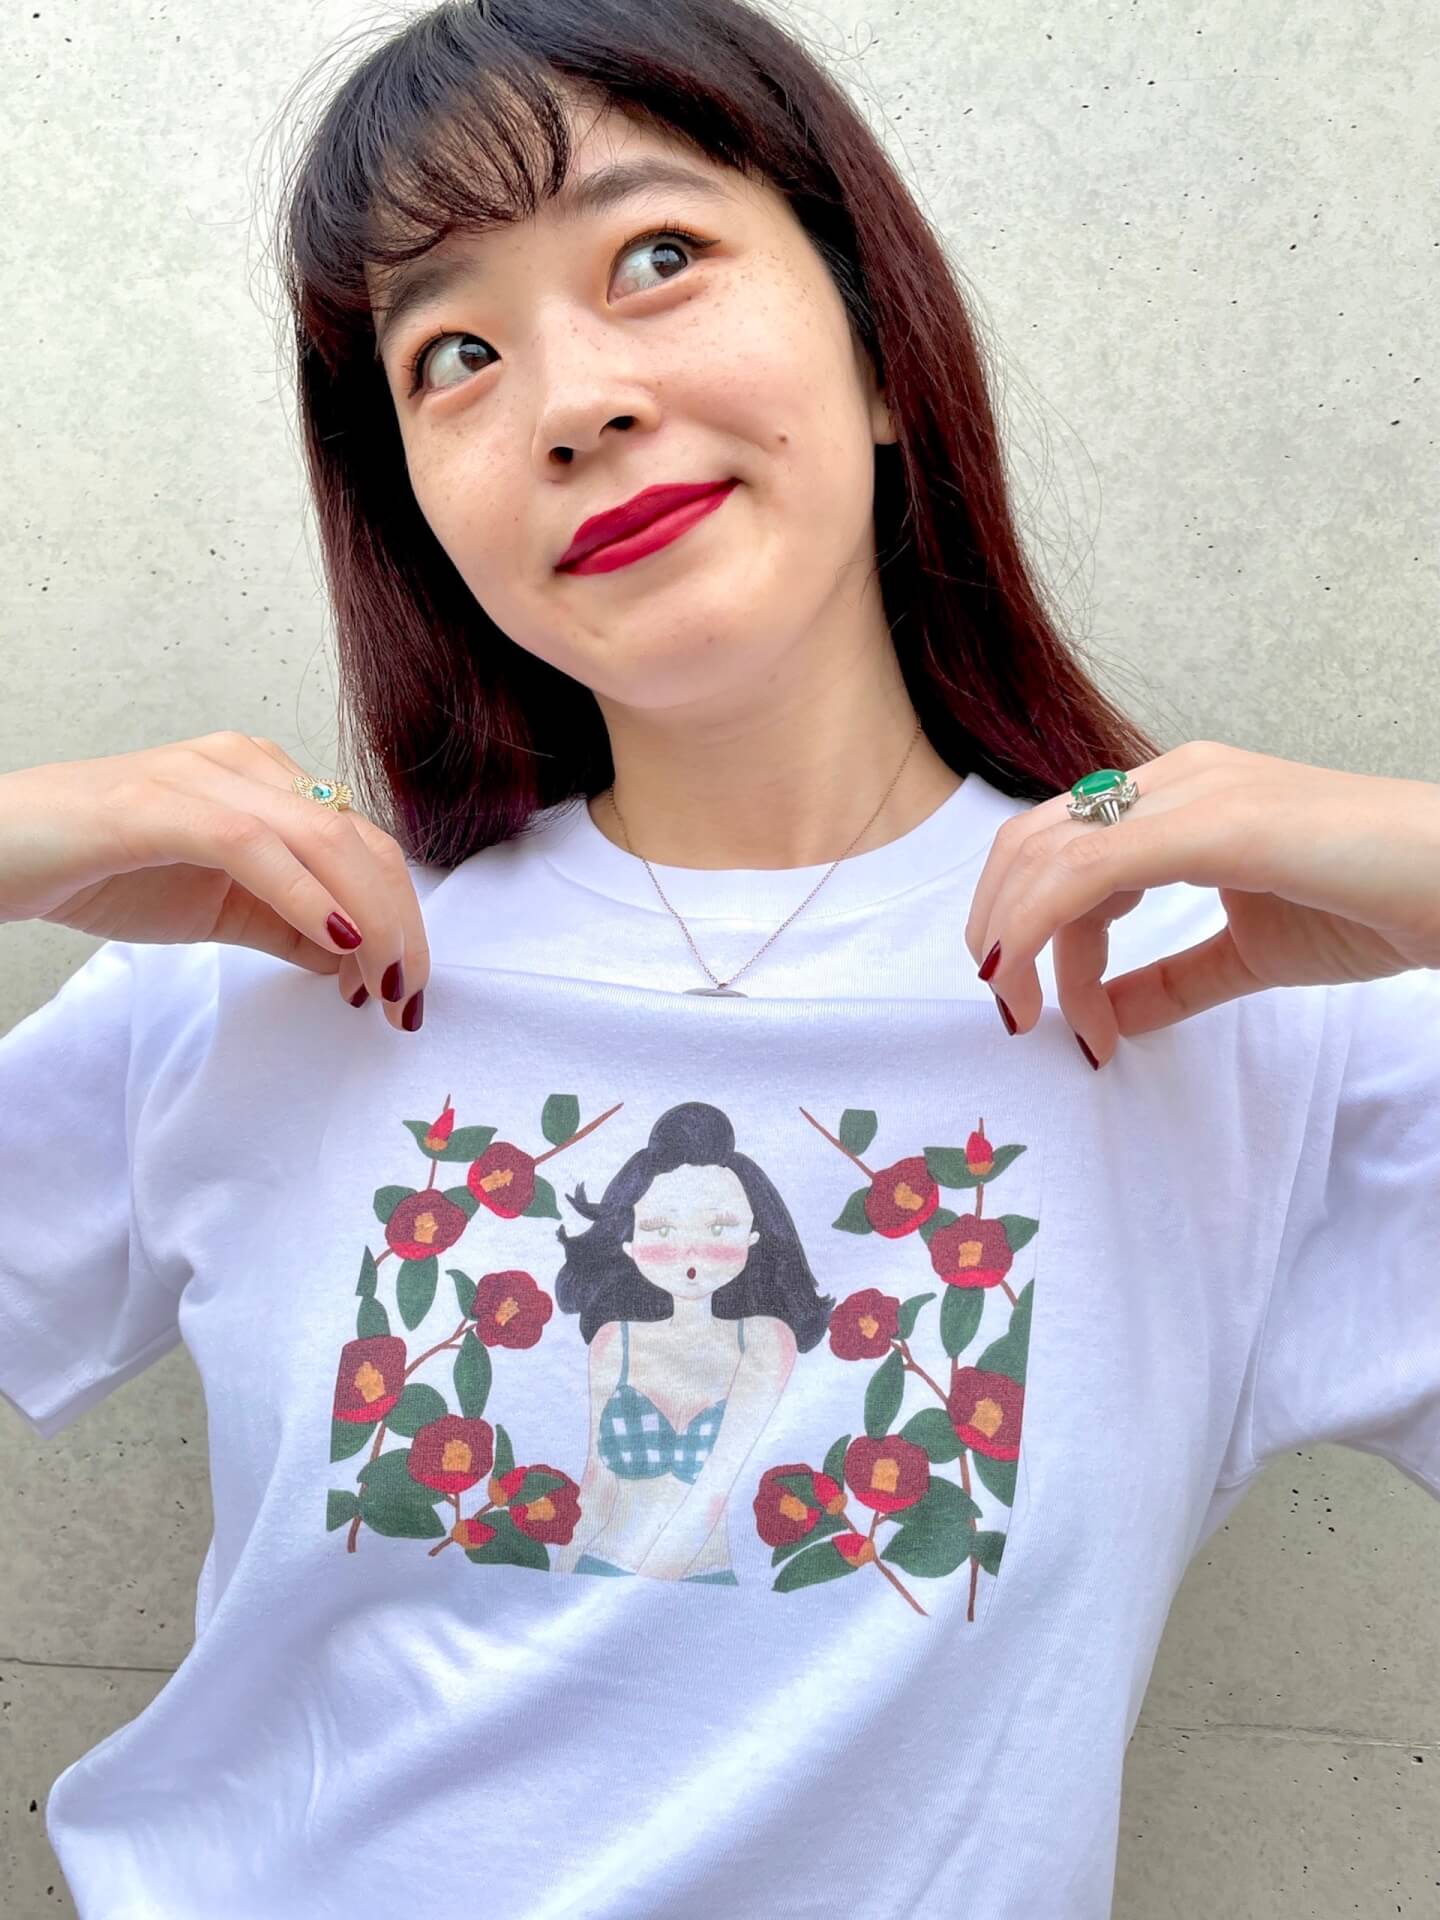 Tシャツを通した表現「BE AT TEE COLLECTION」がスタート！xiangyu、上出遼平らによるTシャツが受注販売 fashion211015-be-at-tee-collection-02